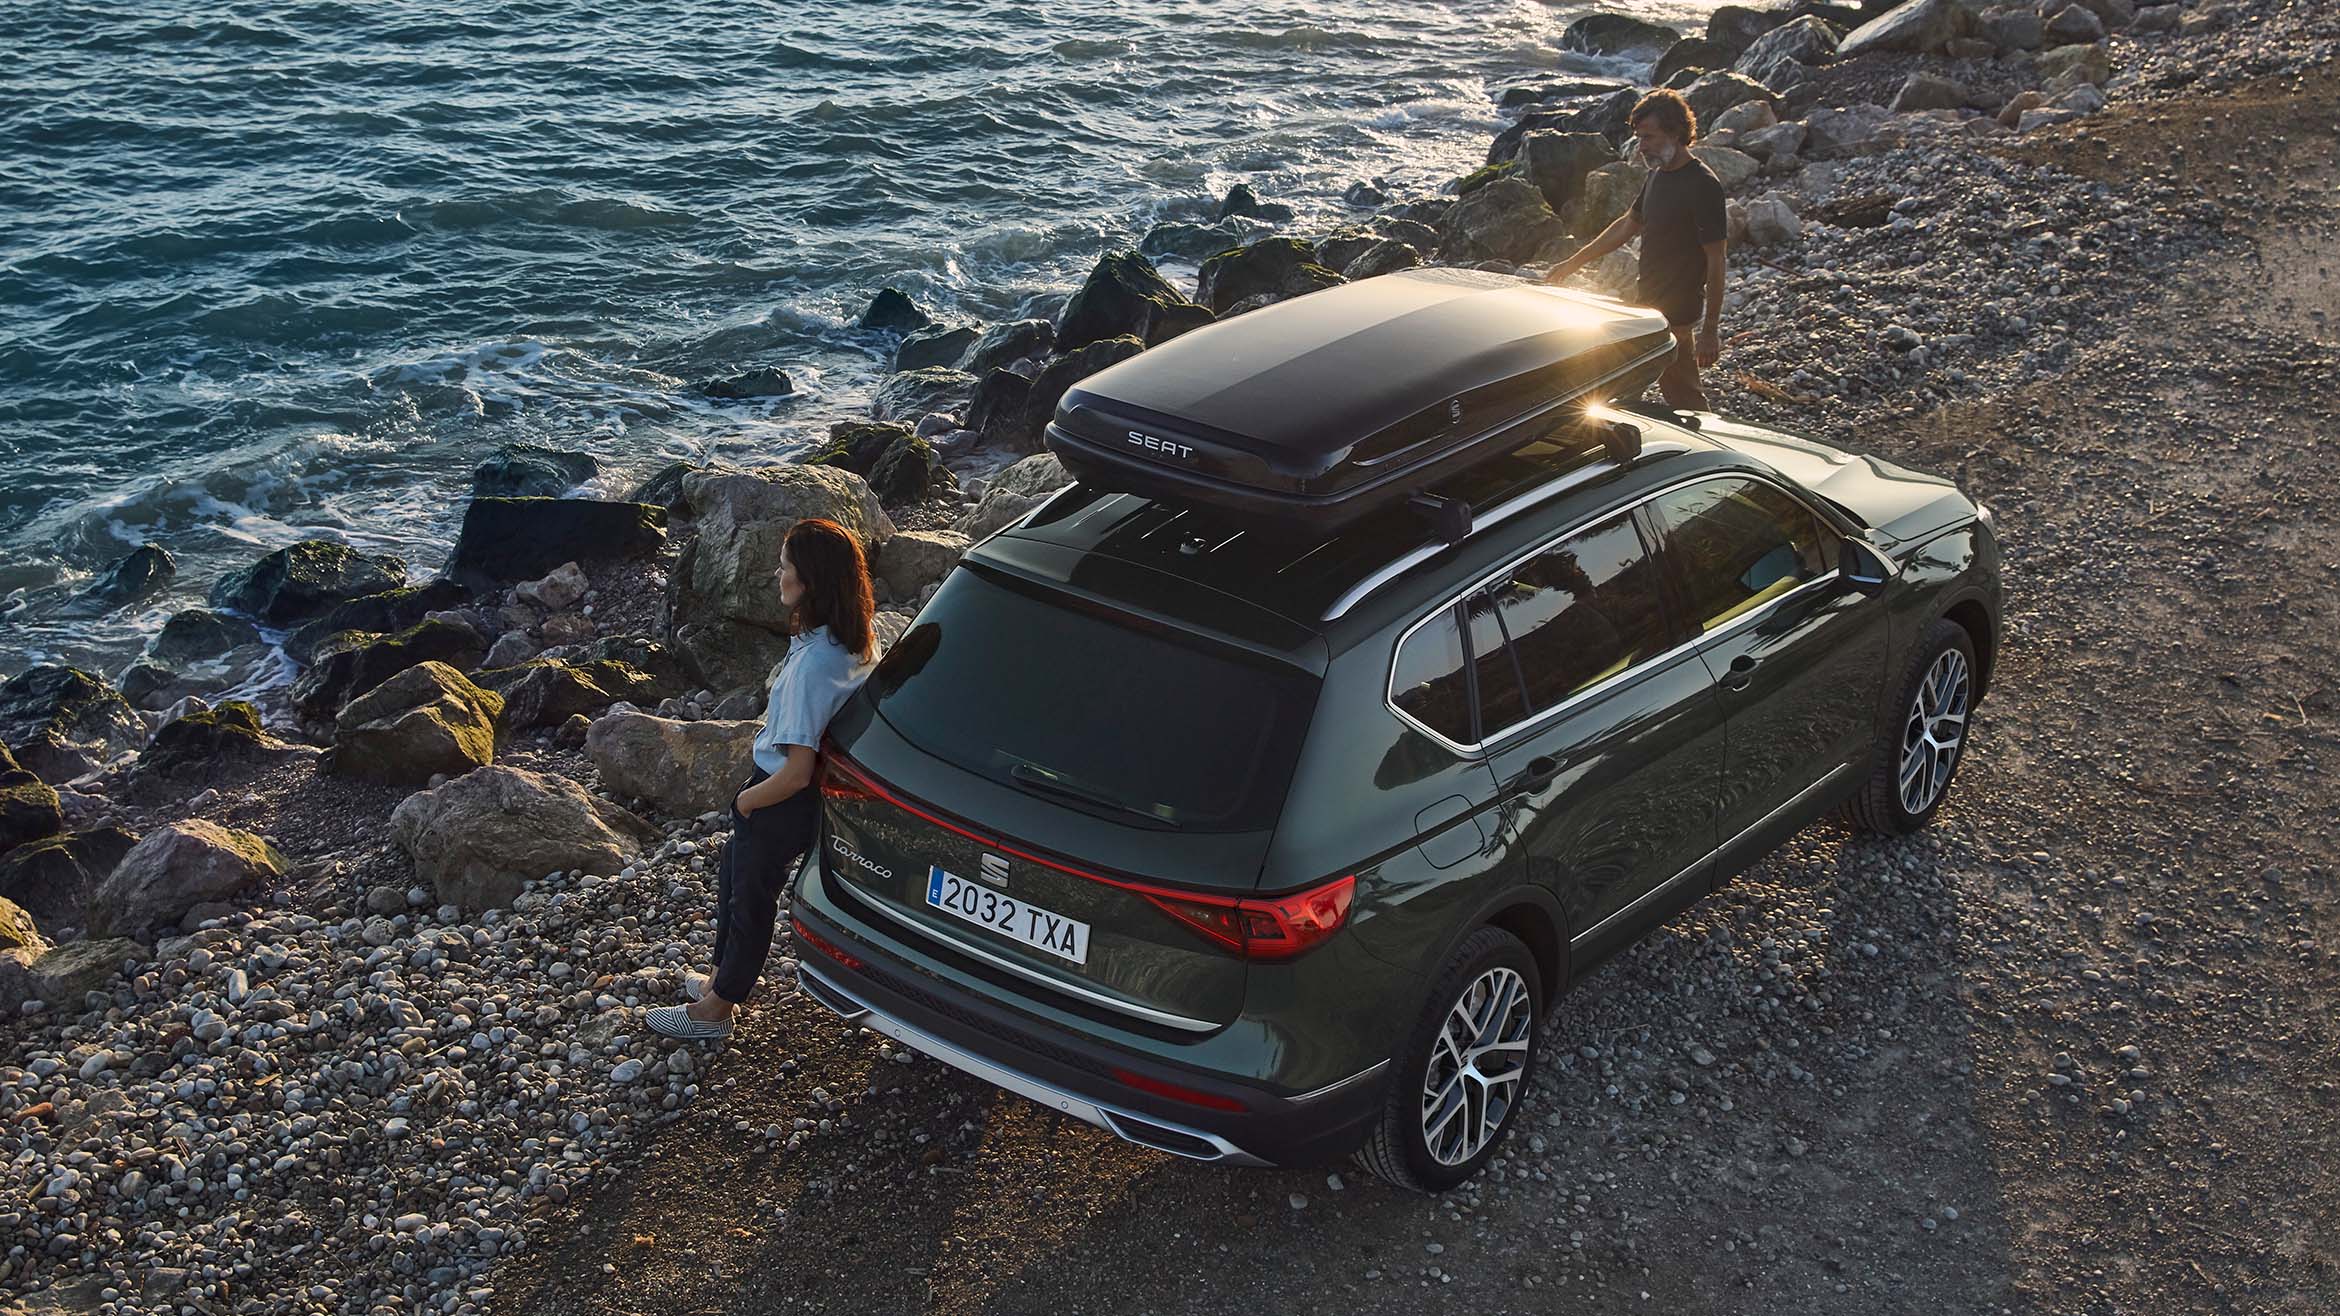 The SEAT Tarraco XPERIENCE with roof box